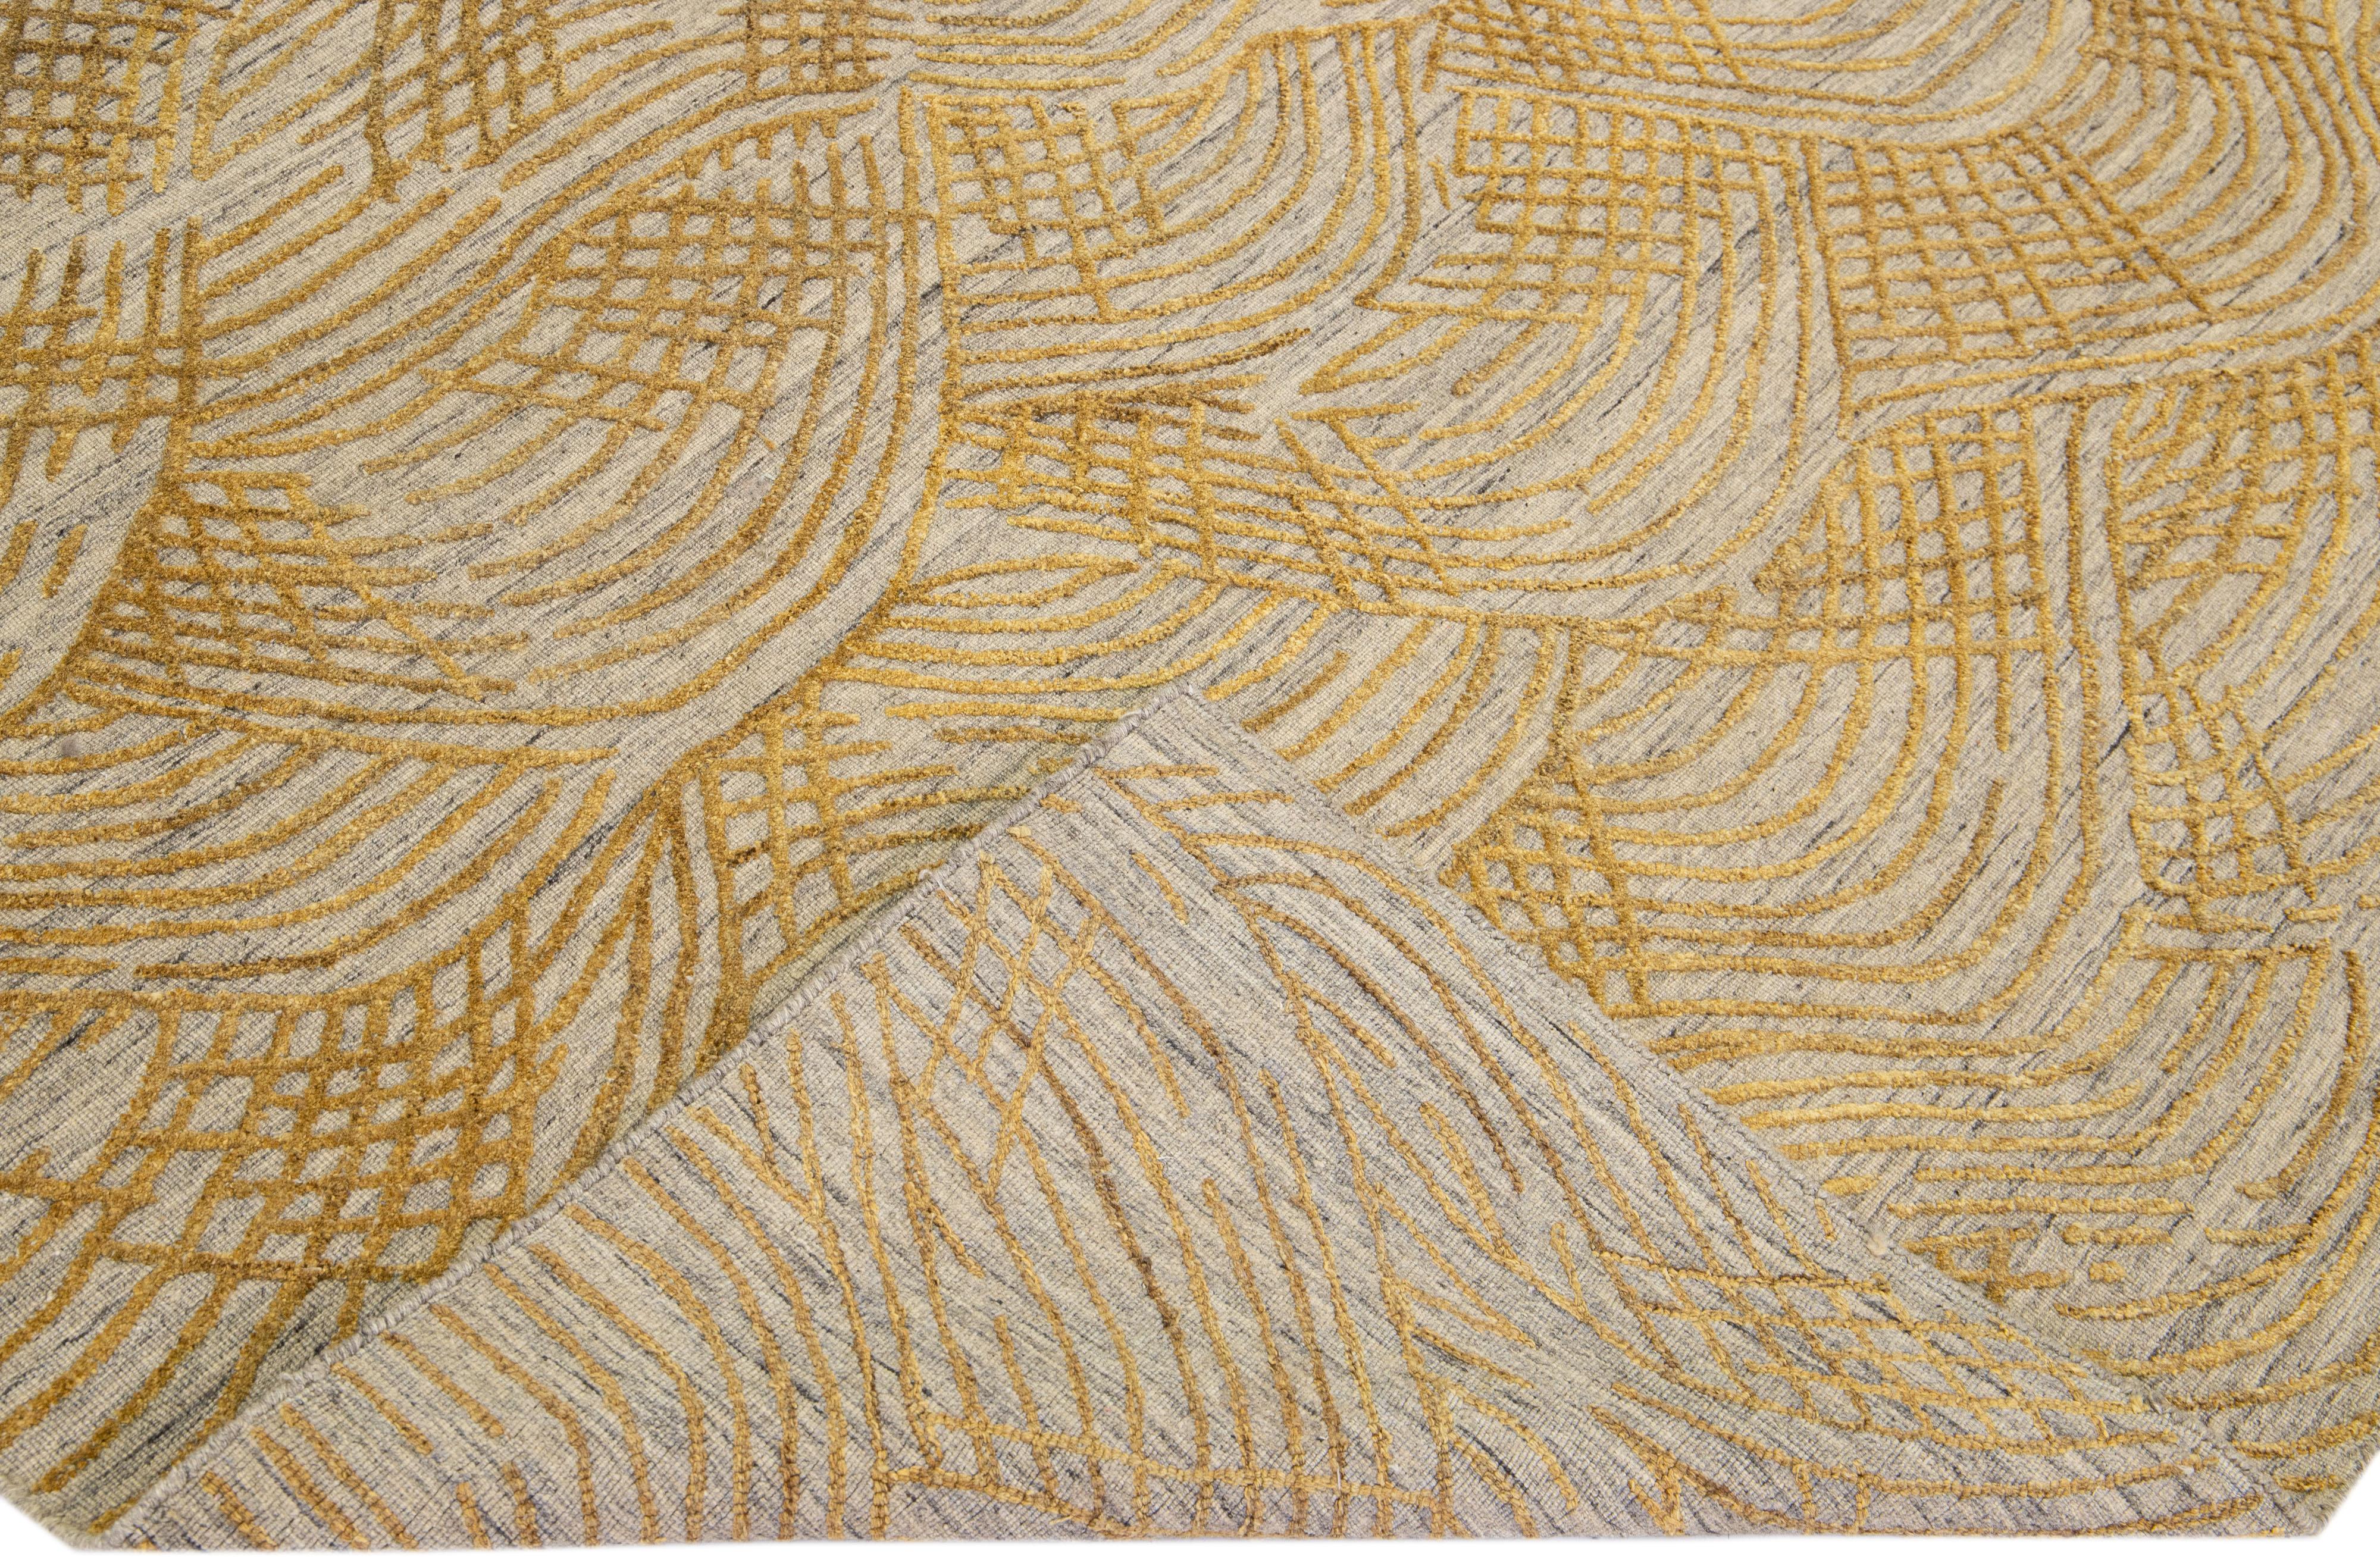 Beautiful Contemporary Thom Filicia Home Collection Rugs. This Indian hand-woven rug is made of wool & viscose and has a gray/beige field and golden accents all over the design. 
Thom Filicia´s eye for exquisite detailing and beautiful texture